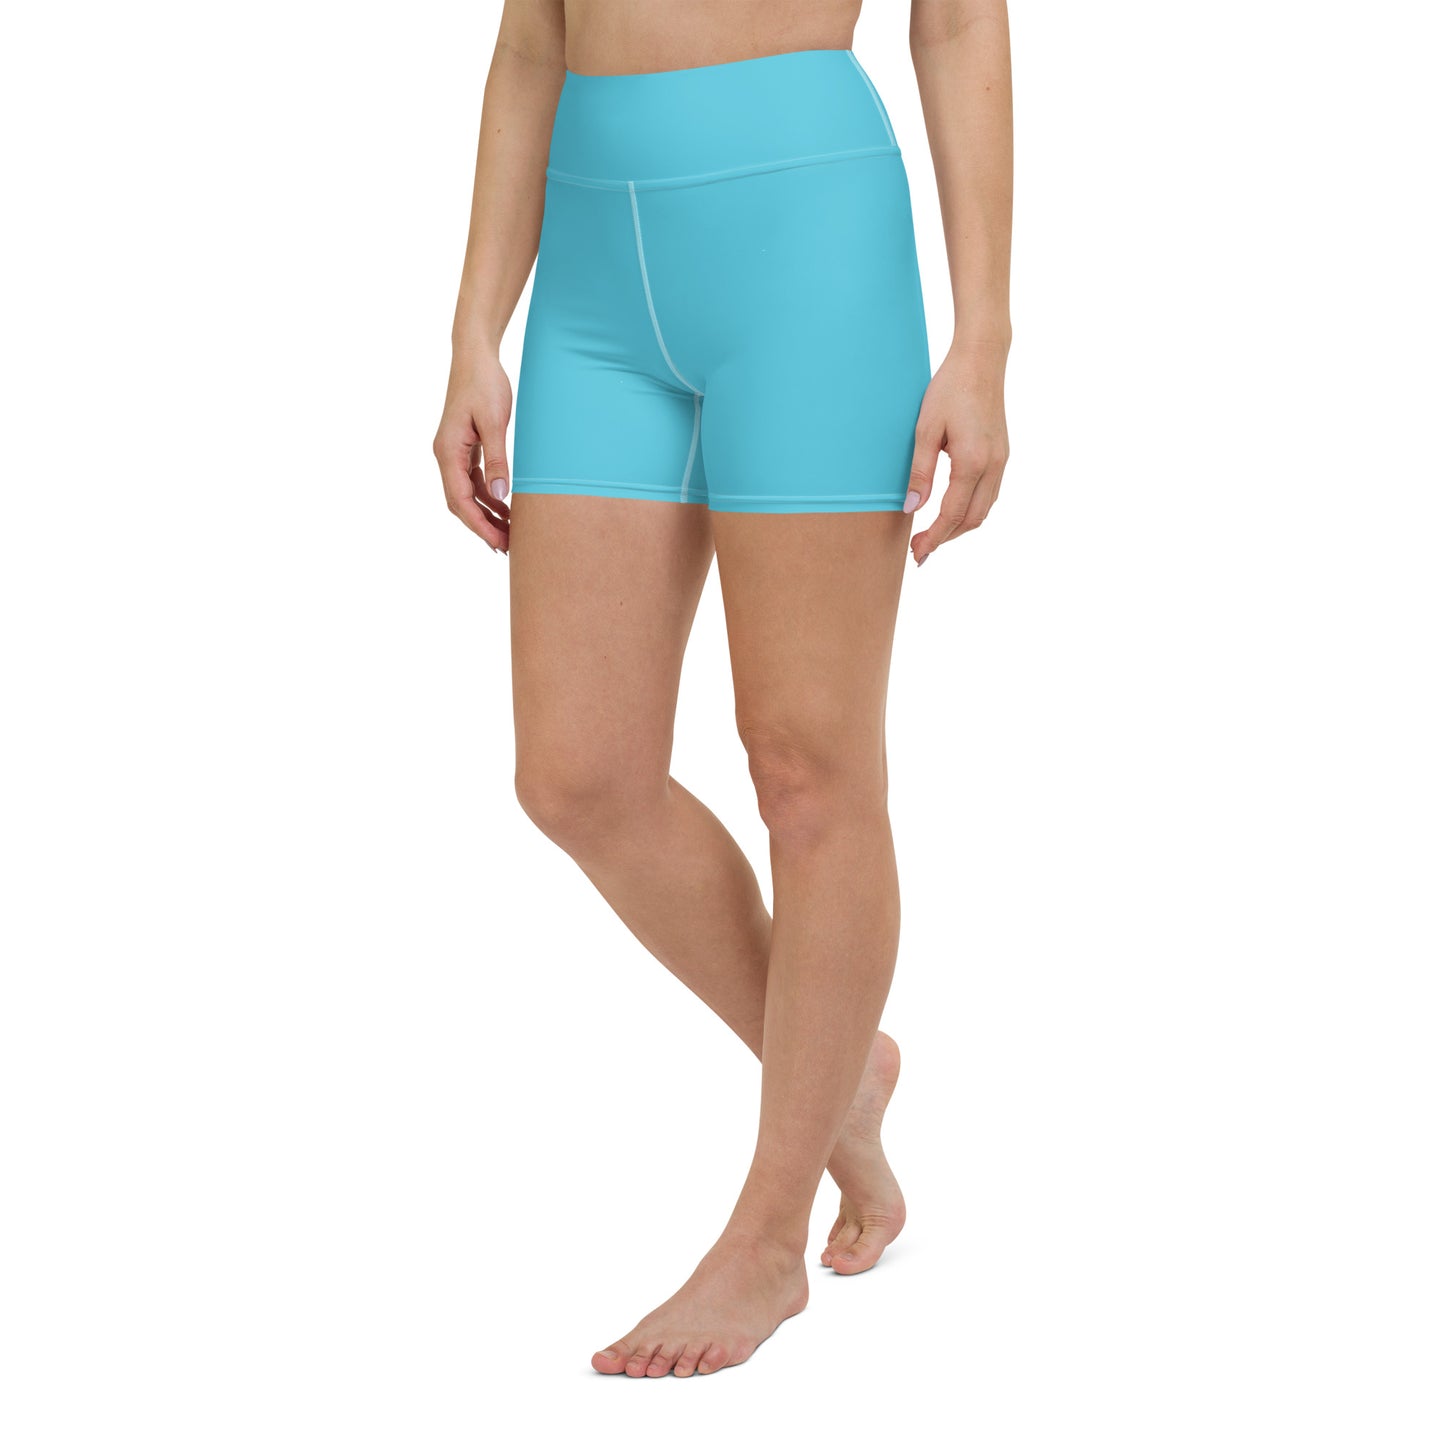 Fiori Solid Color High Waist Yoga Shorts / Bike Shorts with Inside Pocket